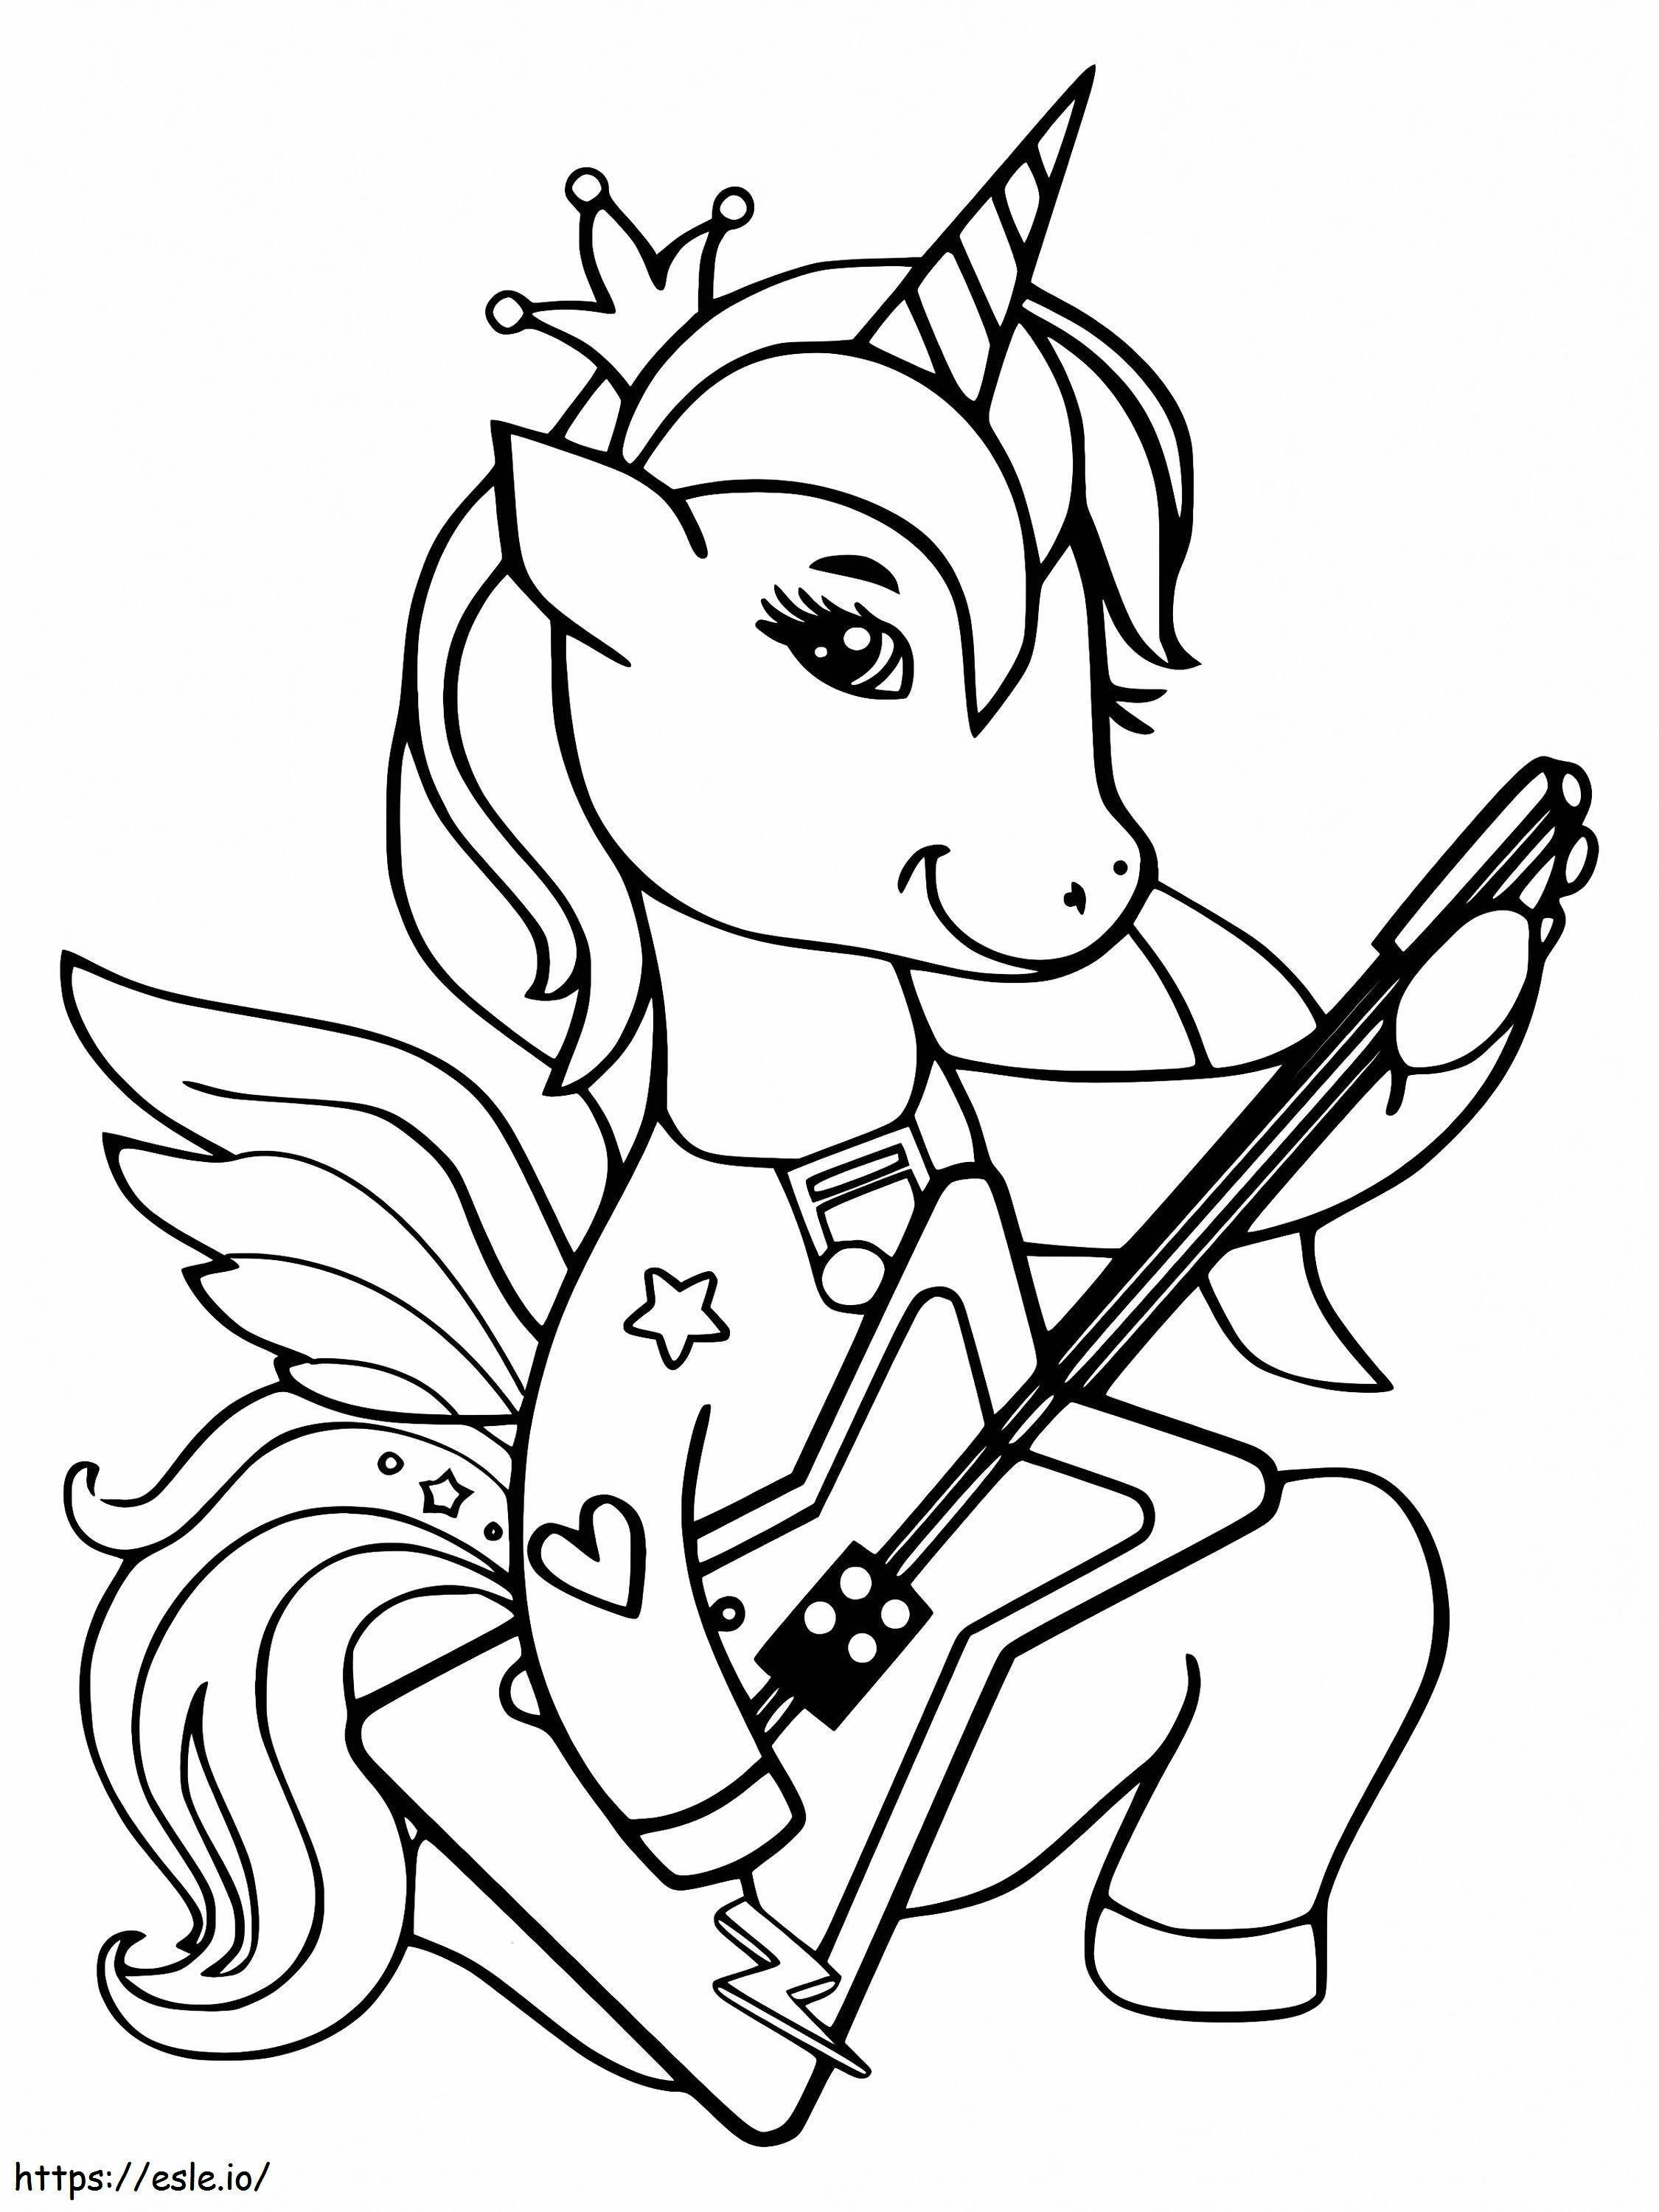 Alicorn Playing A Guitar coloring page